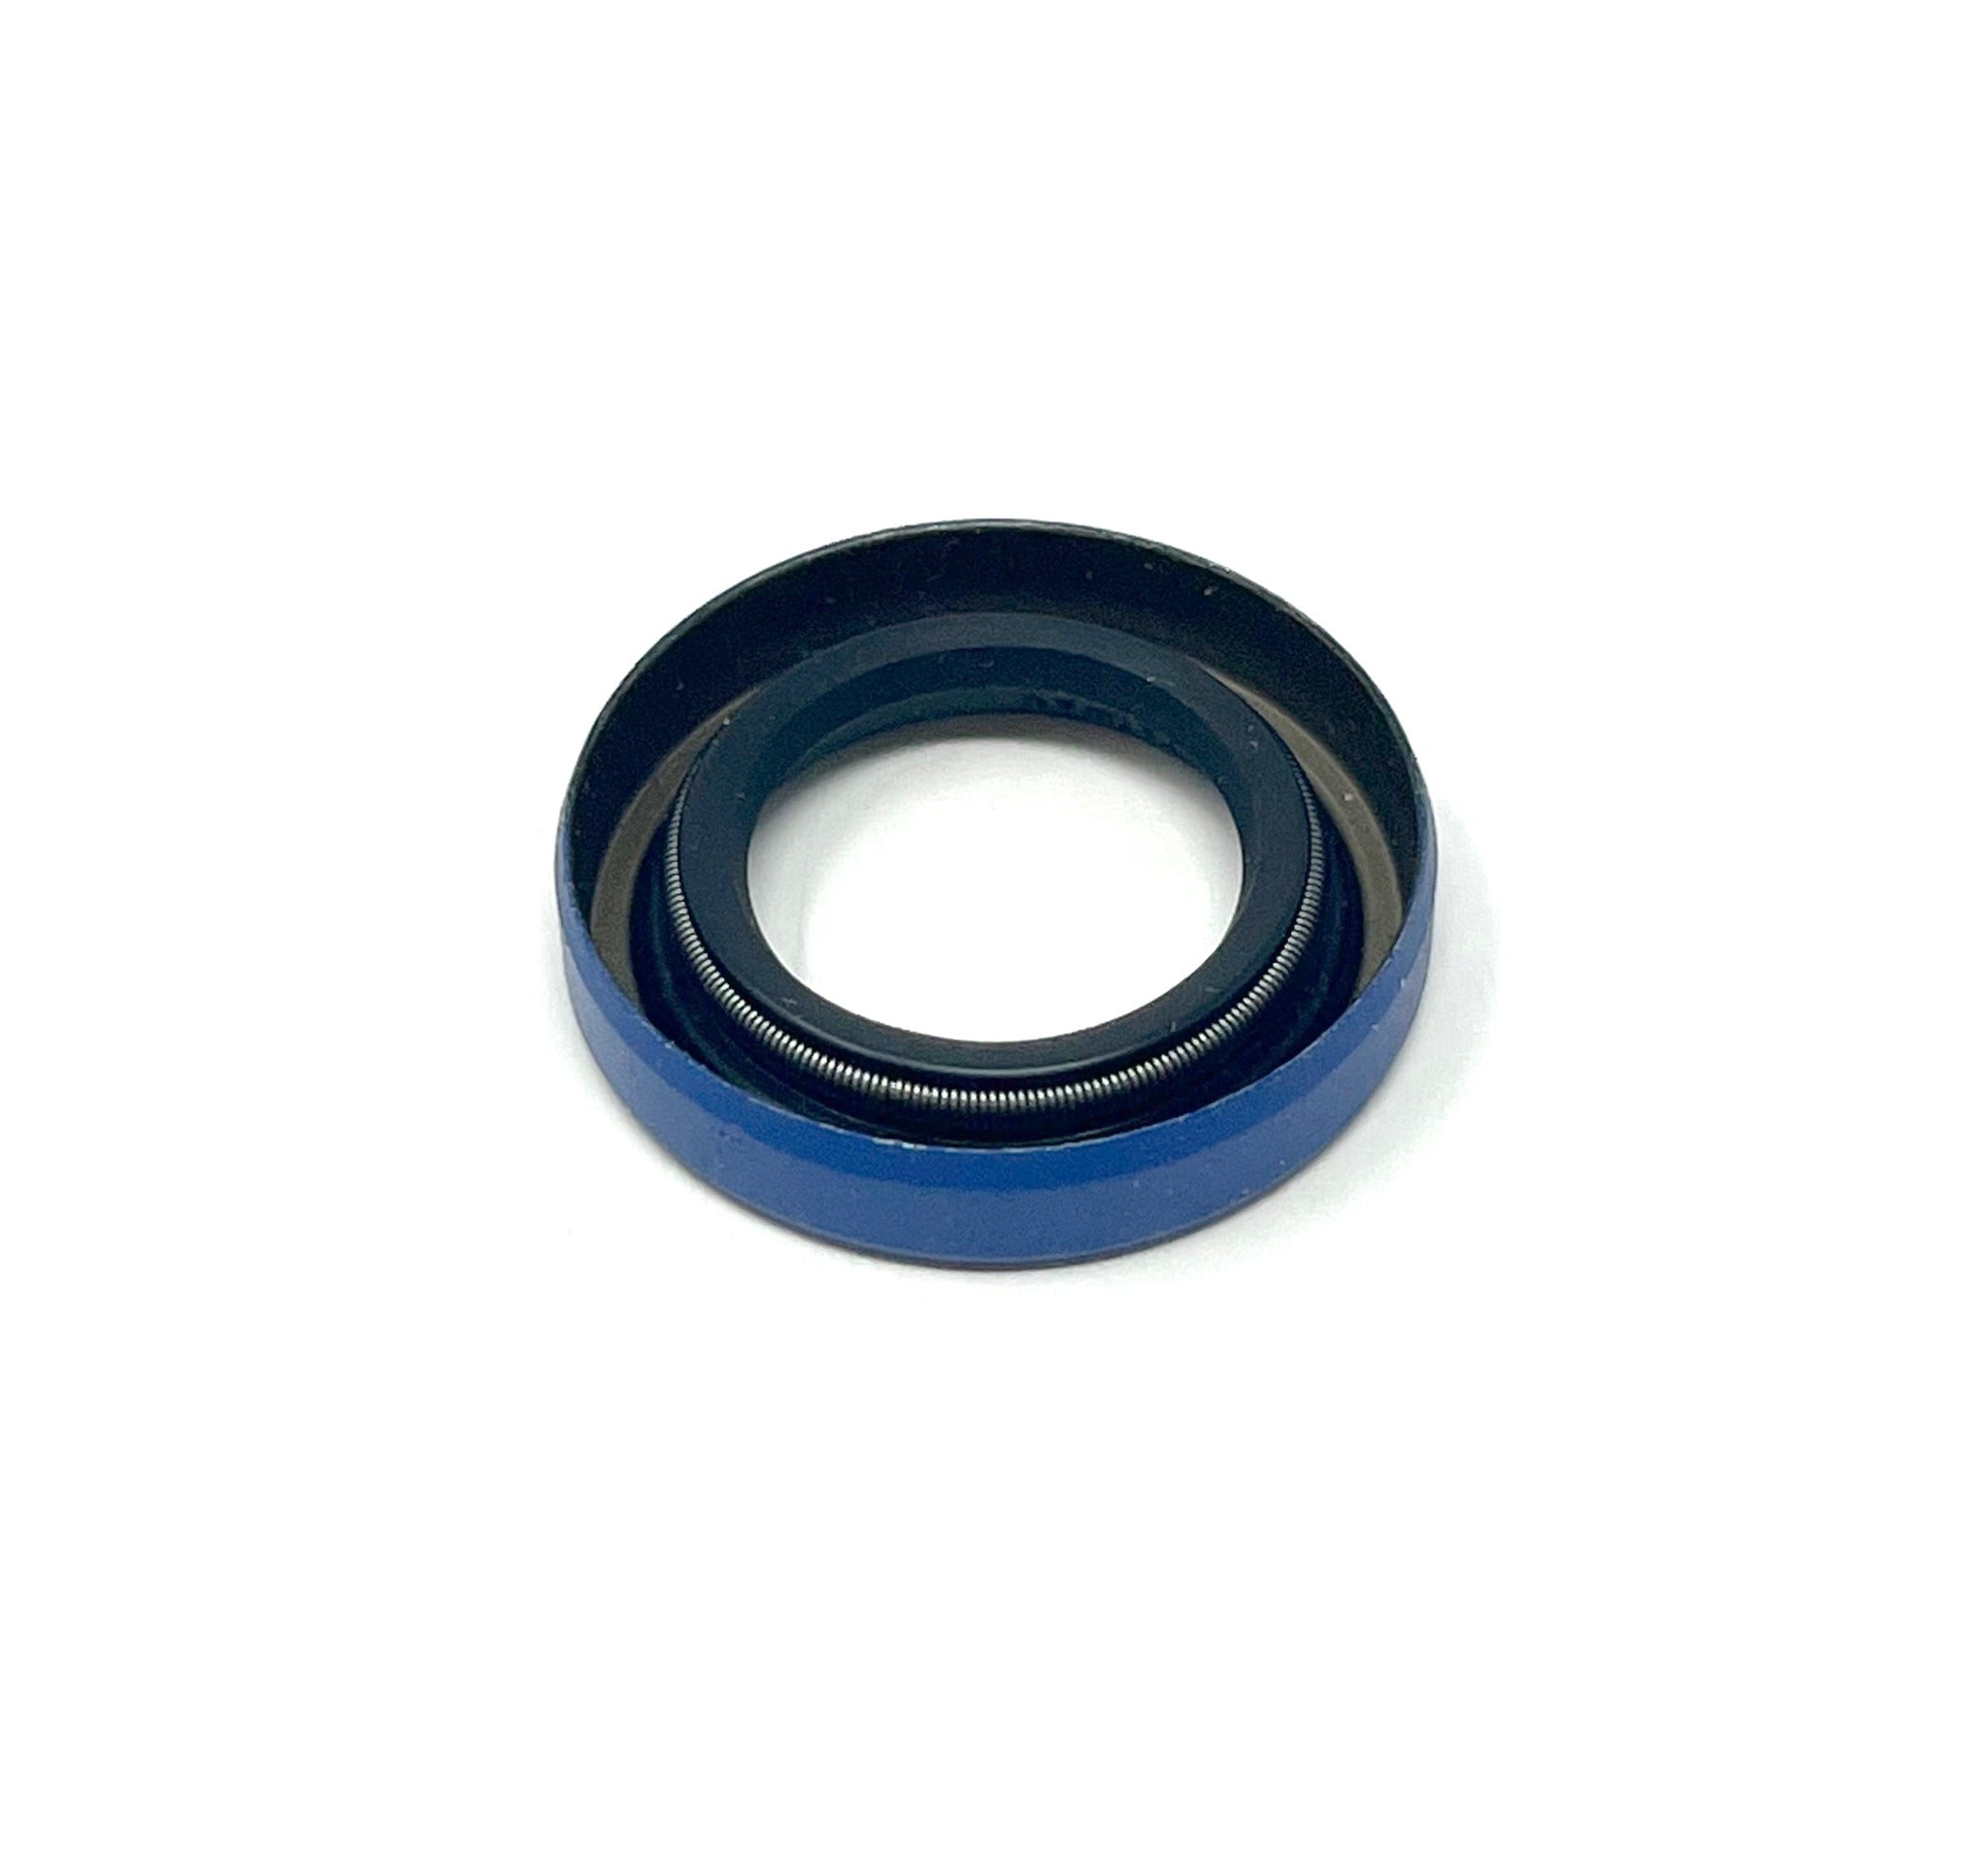 Ammco Seal (Blue)